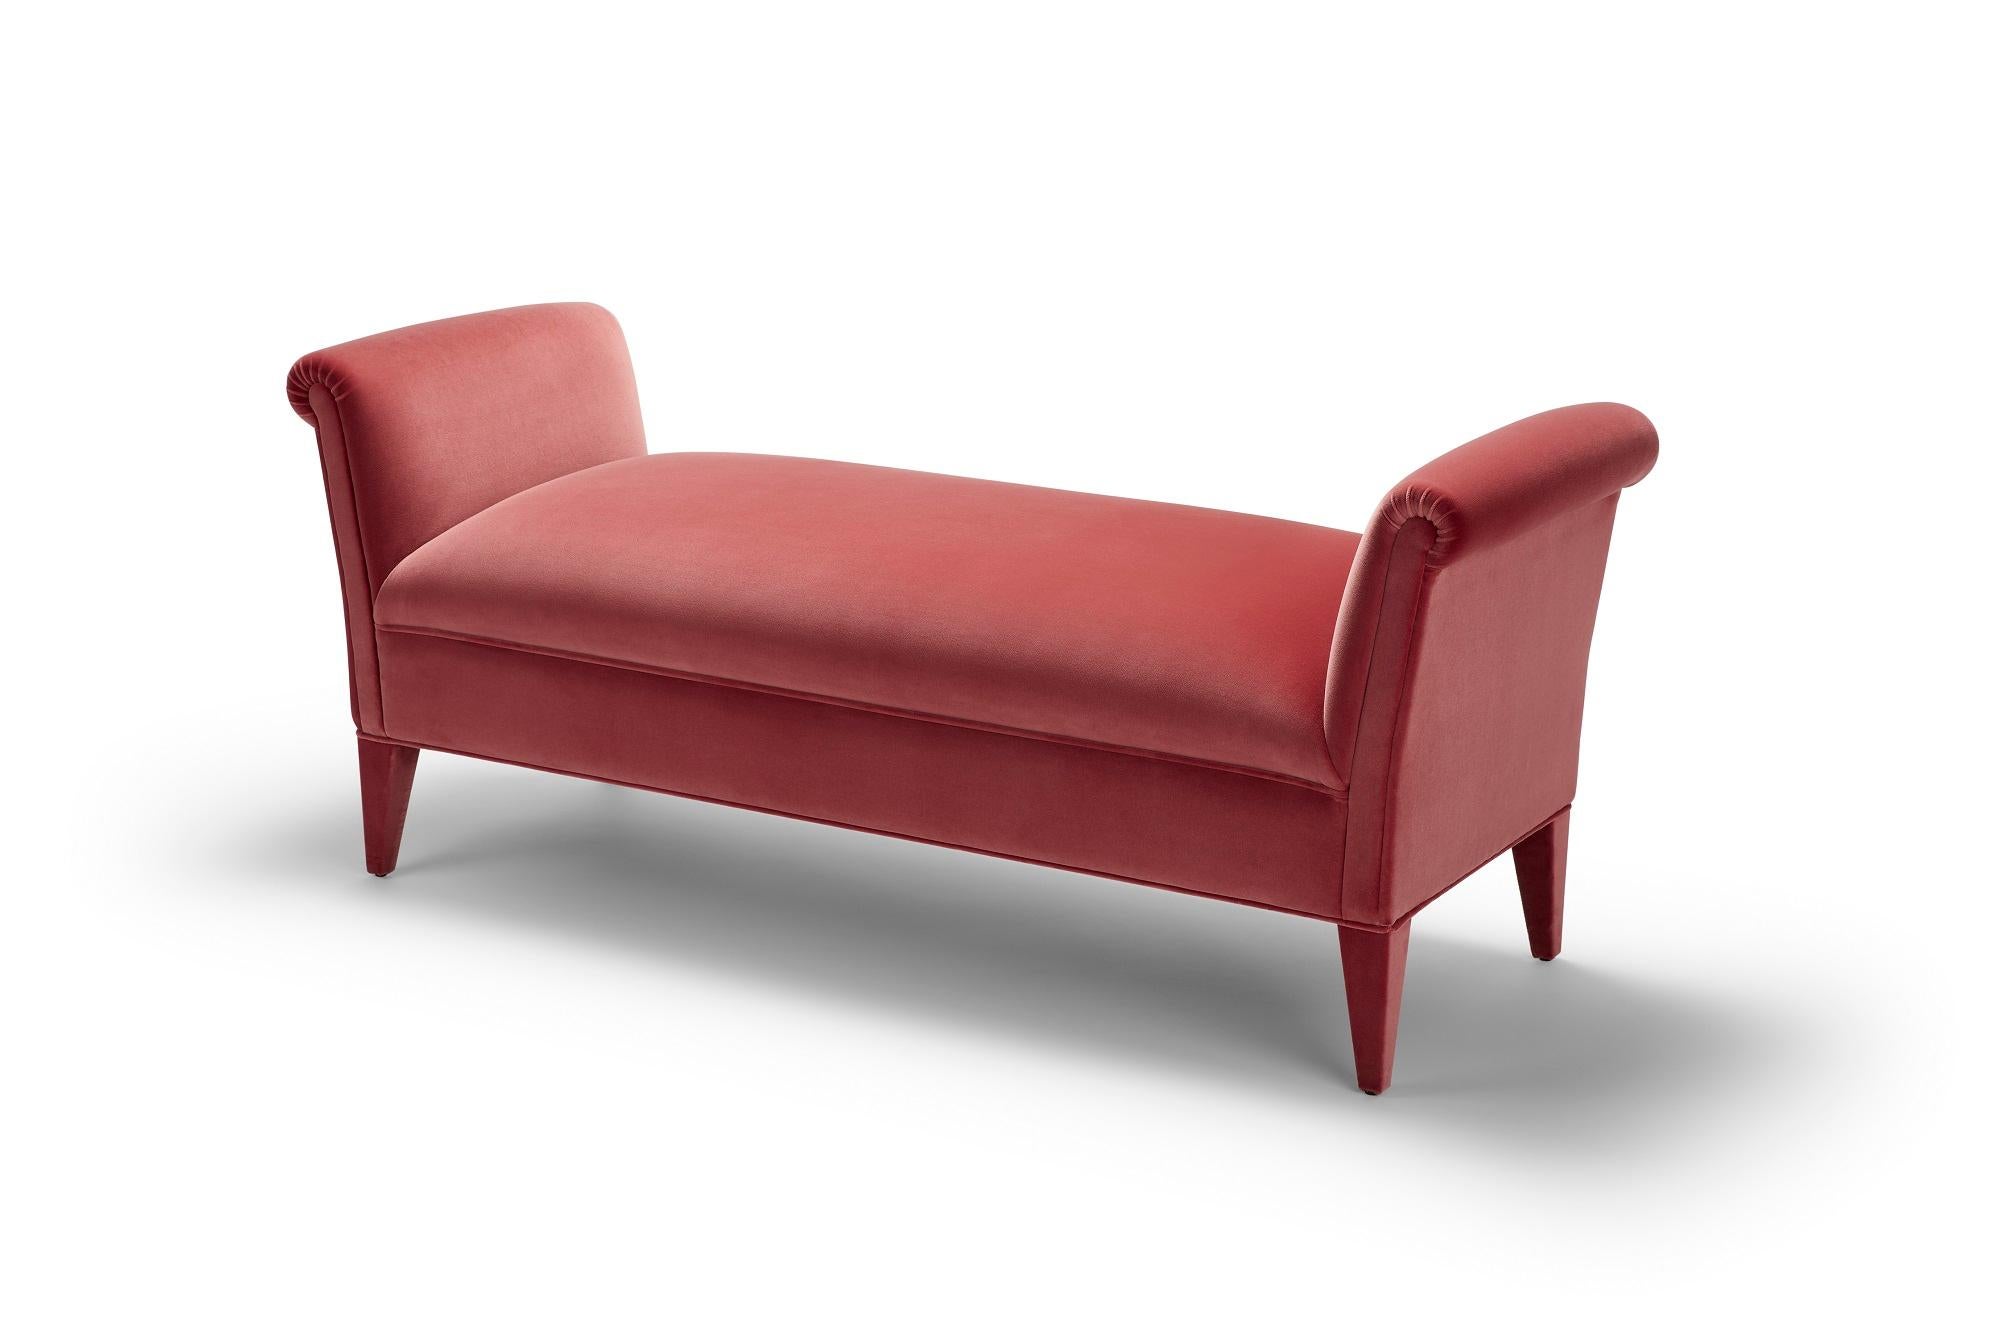 The Eto Bench is our new addition to our collection for 2023, to compliment our elegant Eto range. This piece is idyllic as an end-of-bed bench or hallway statement piece. Simple and beautifully detailed, with exquisite scrolled arm rests.